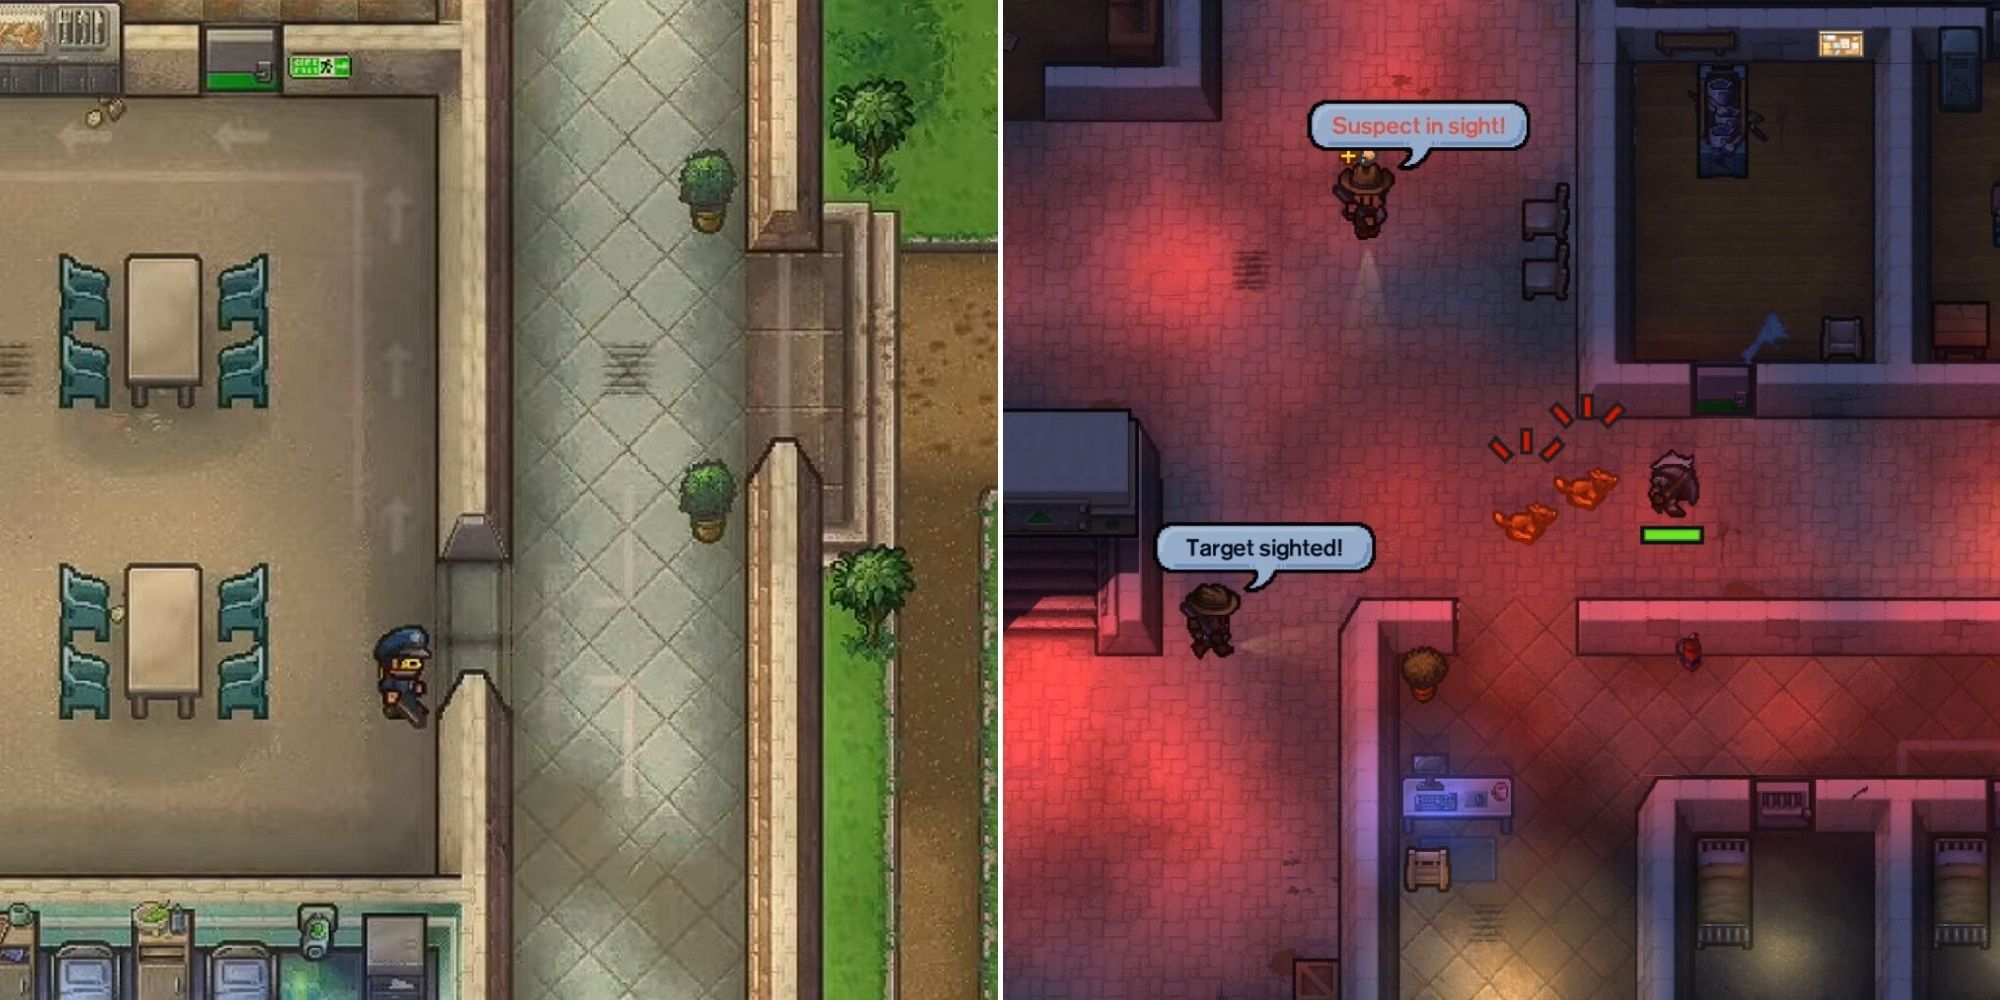 The Escapists 2 - Guard disguise - Being chased by guards and dogs